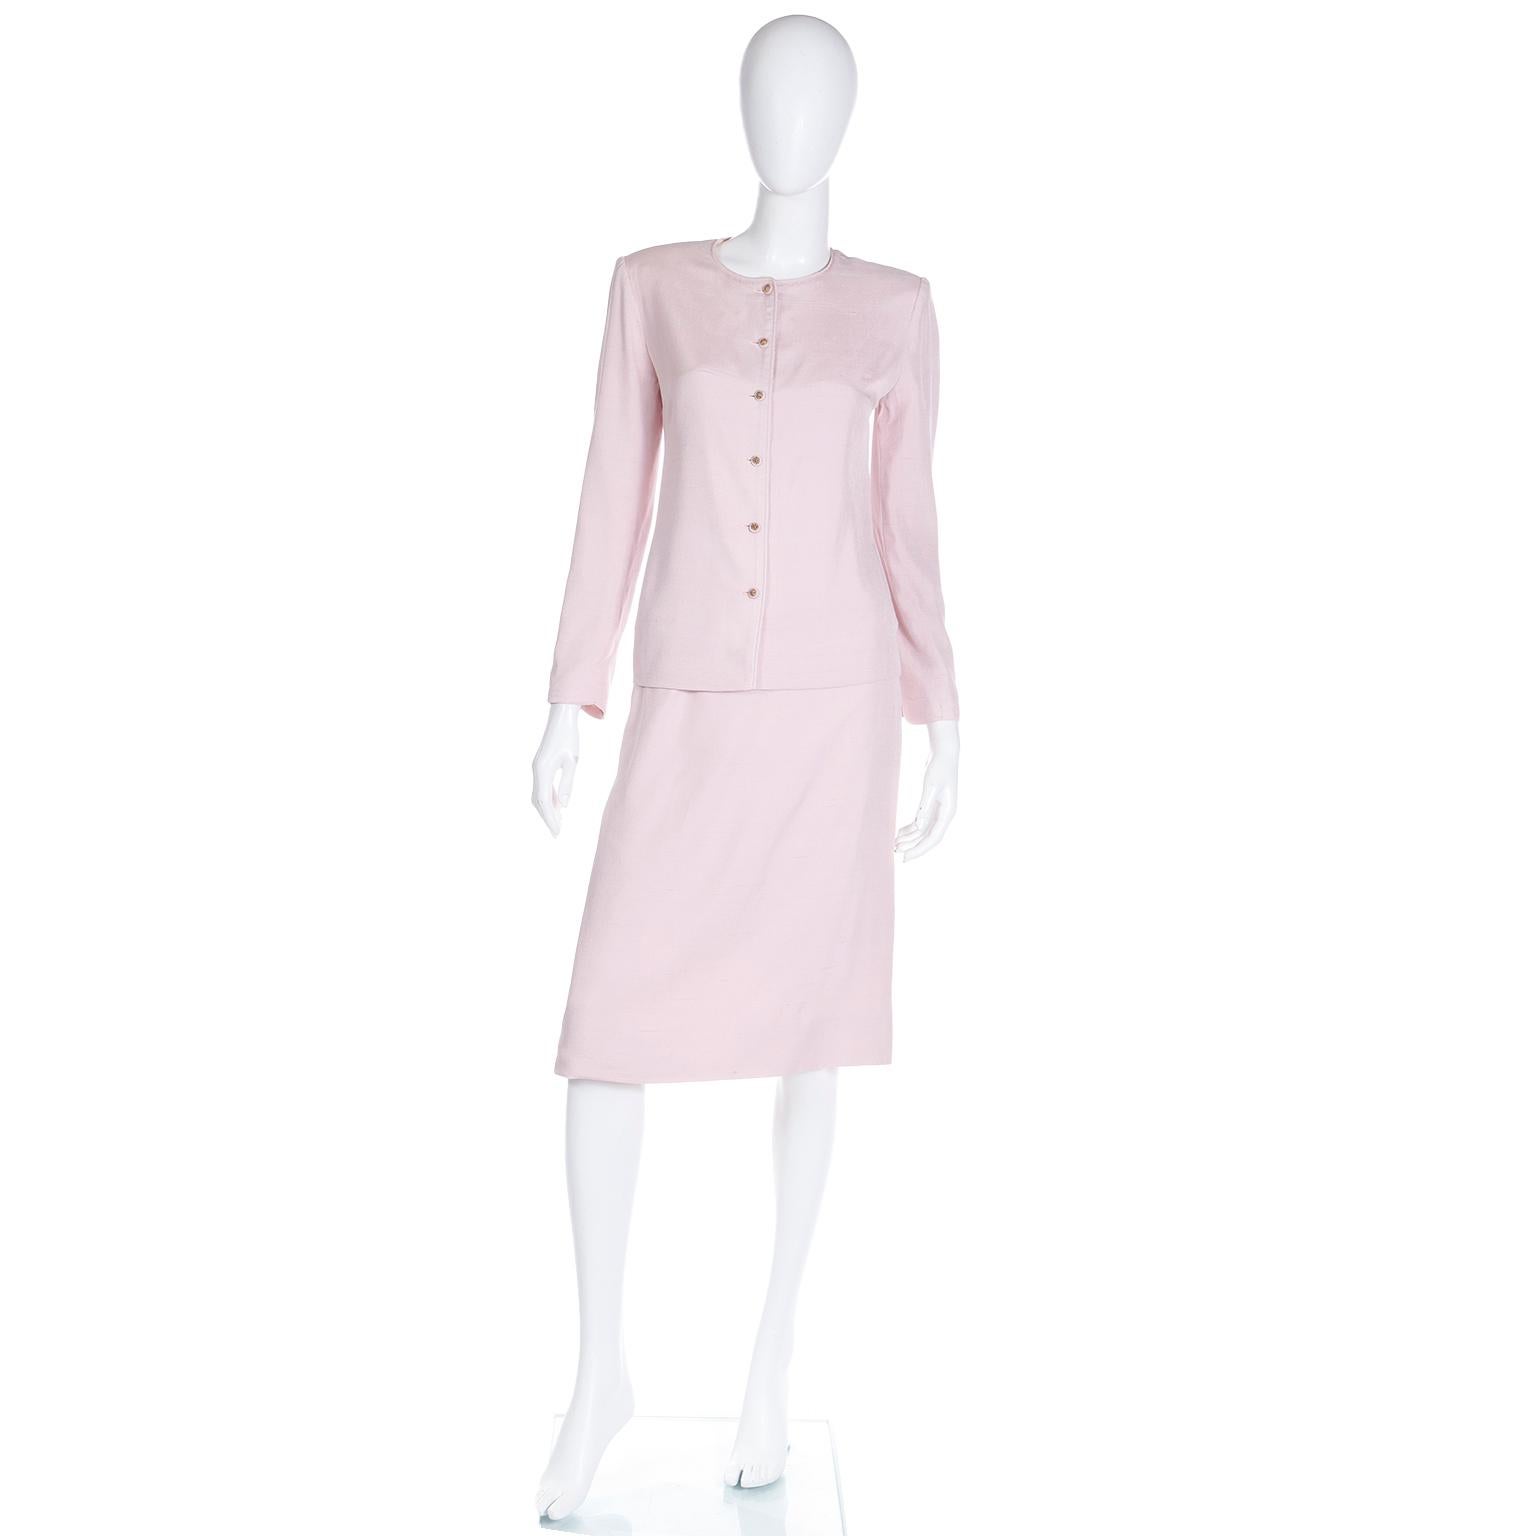 Who doesn't love pink vintage Chanel? This is a vintage 1979 or 1980 Chanel 2 piece skirt suit in a gorgeous raw silk. Chanel Creations was the first Chanel ready to wear line that was introduced by the French fashion designer Philippe Guibourge in